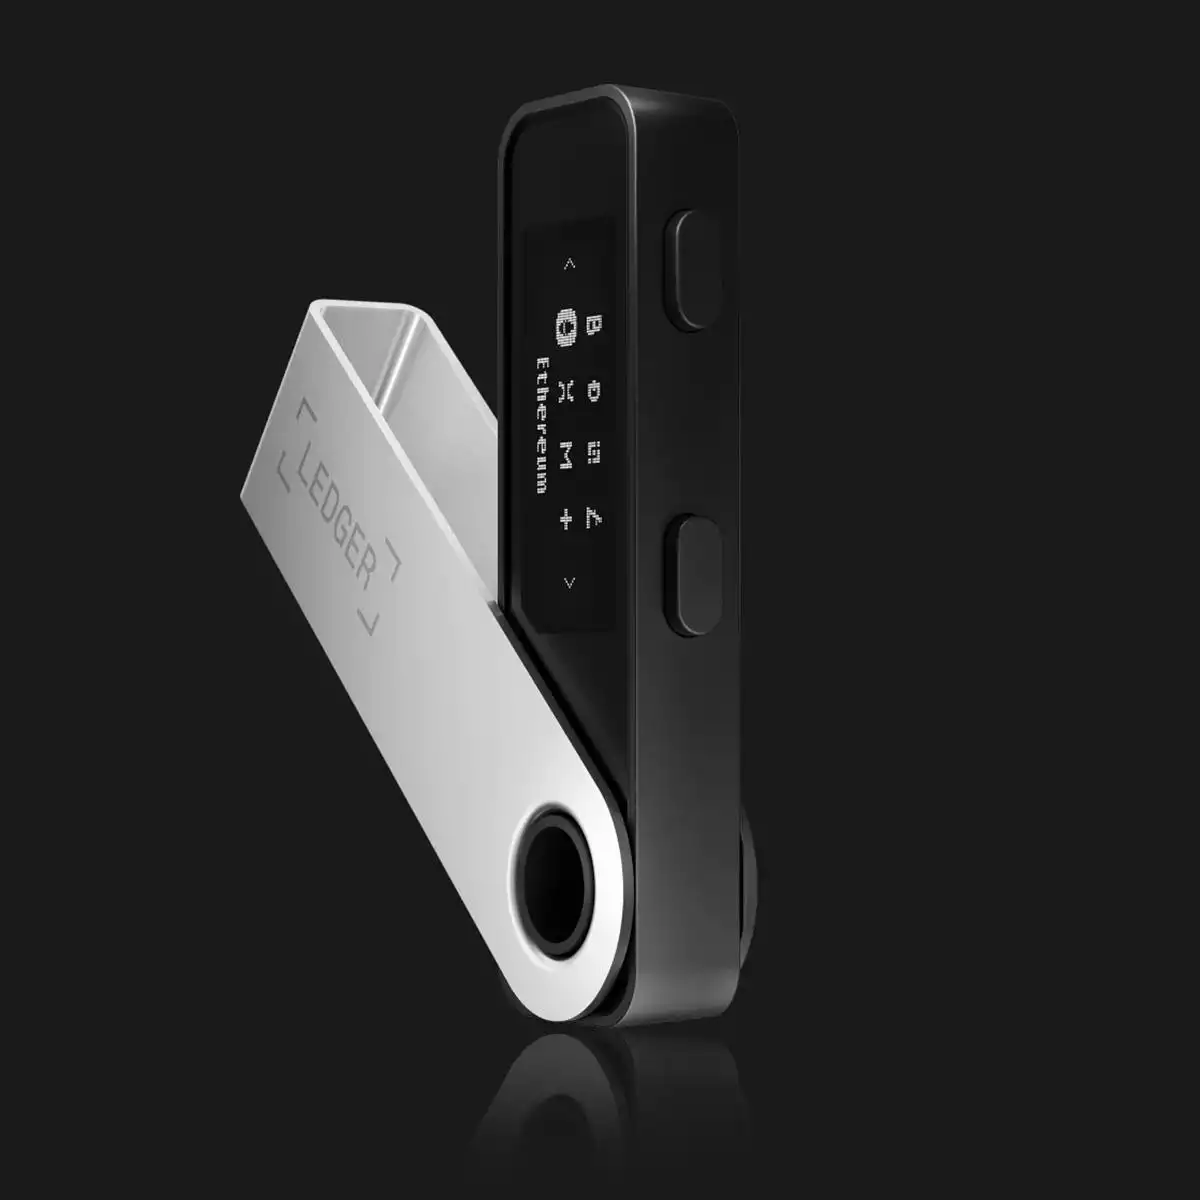 ledger nano s hardware wallet is a bitcoin, ethereum, litecoin, ripple and other altcoins hardware wallet, based on robust safety features for storing...